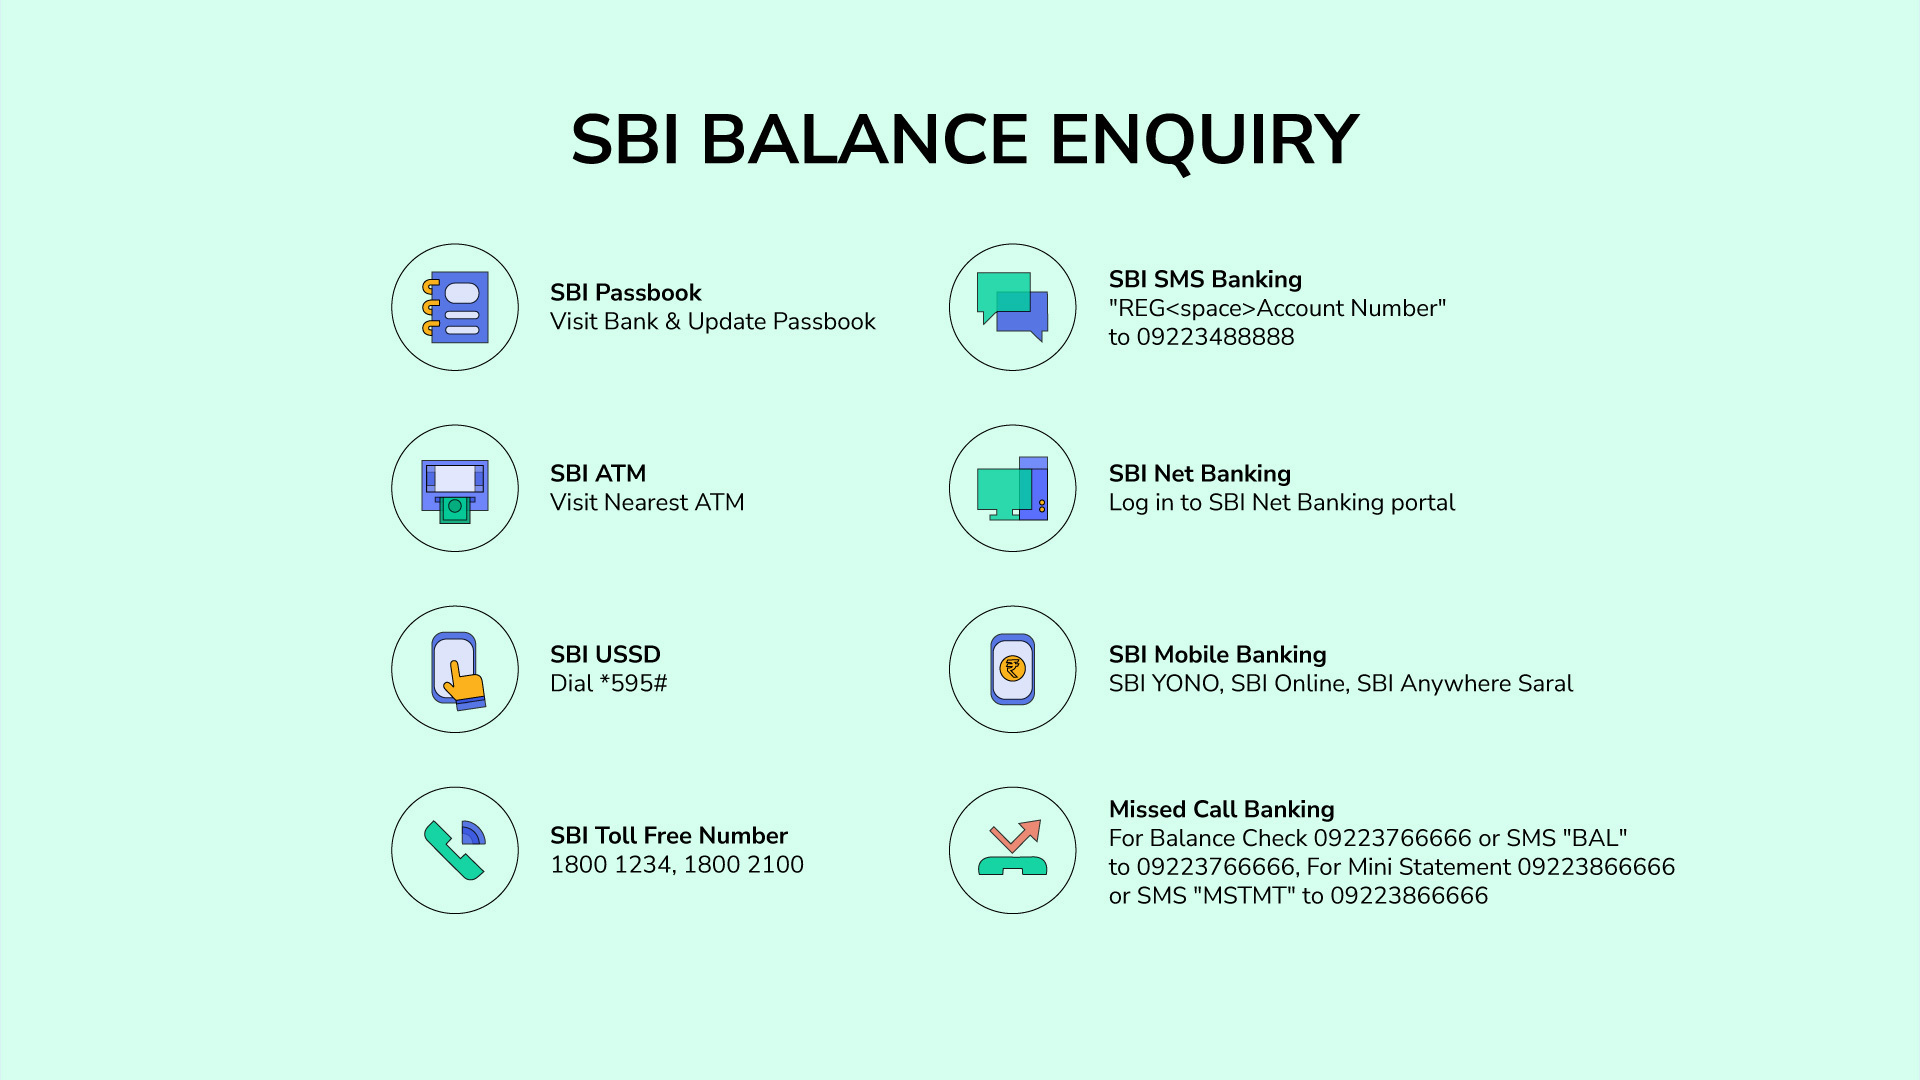 SBI Balance check enquiry number and toll free number